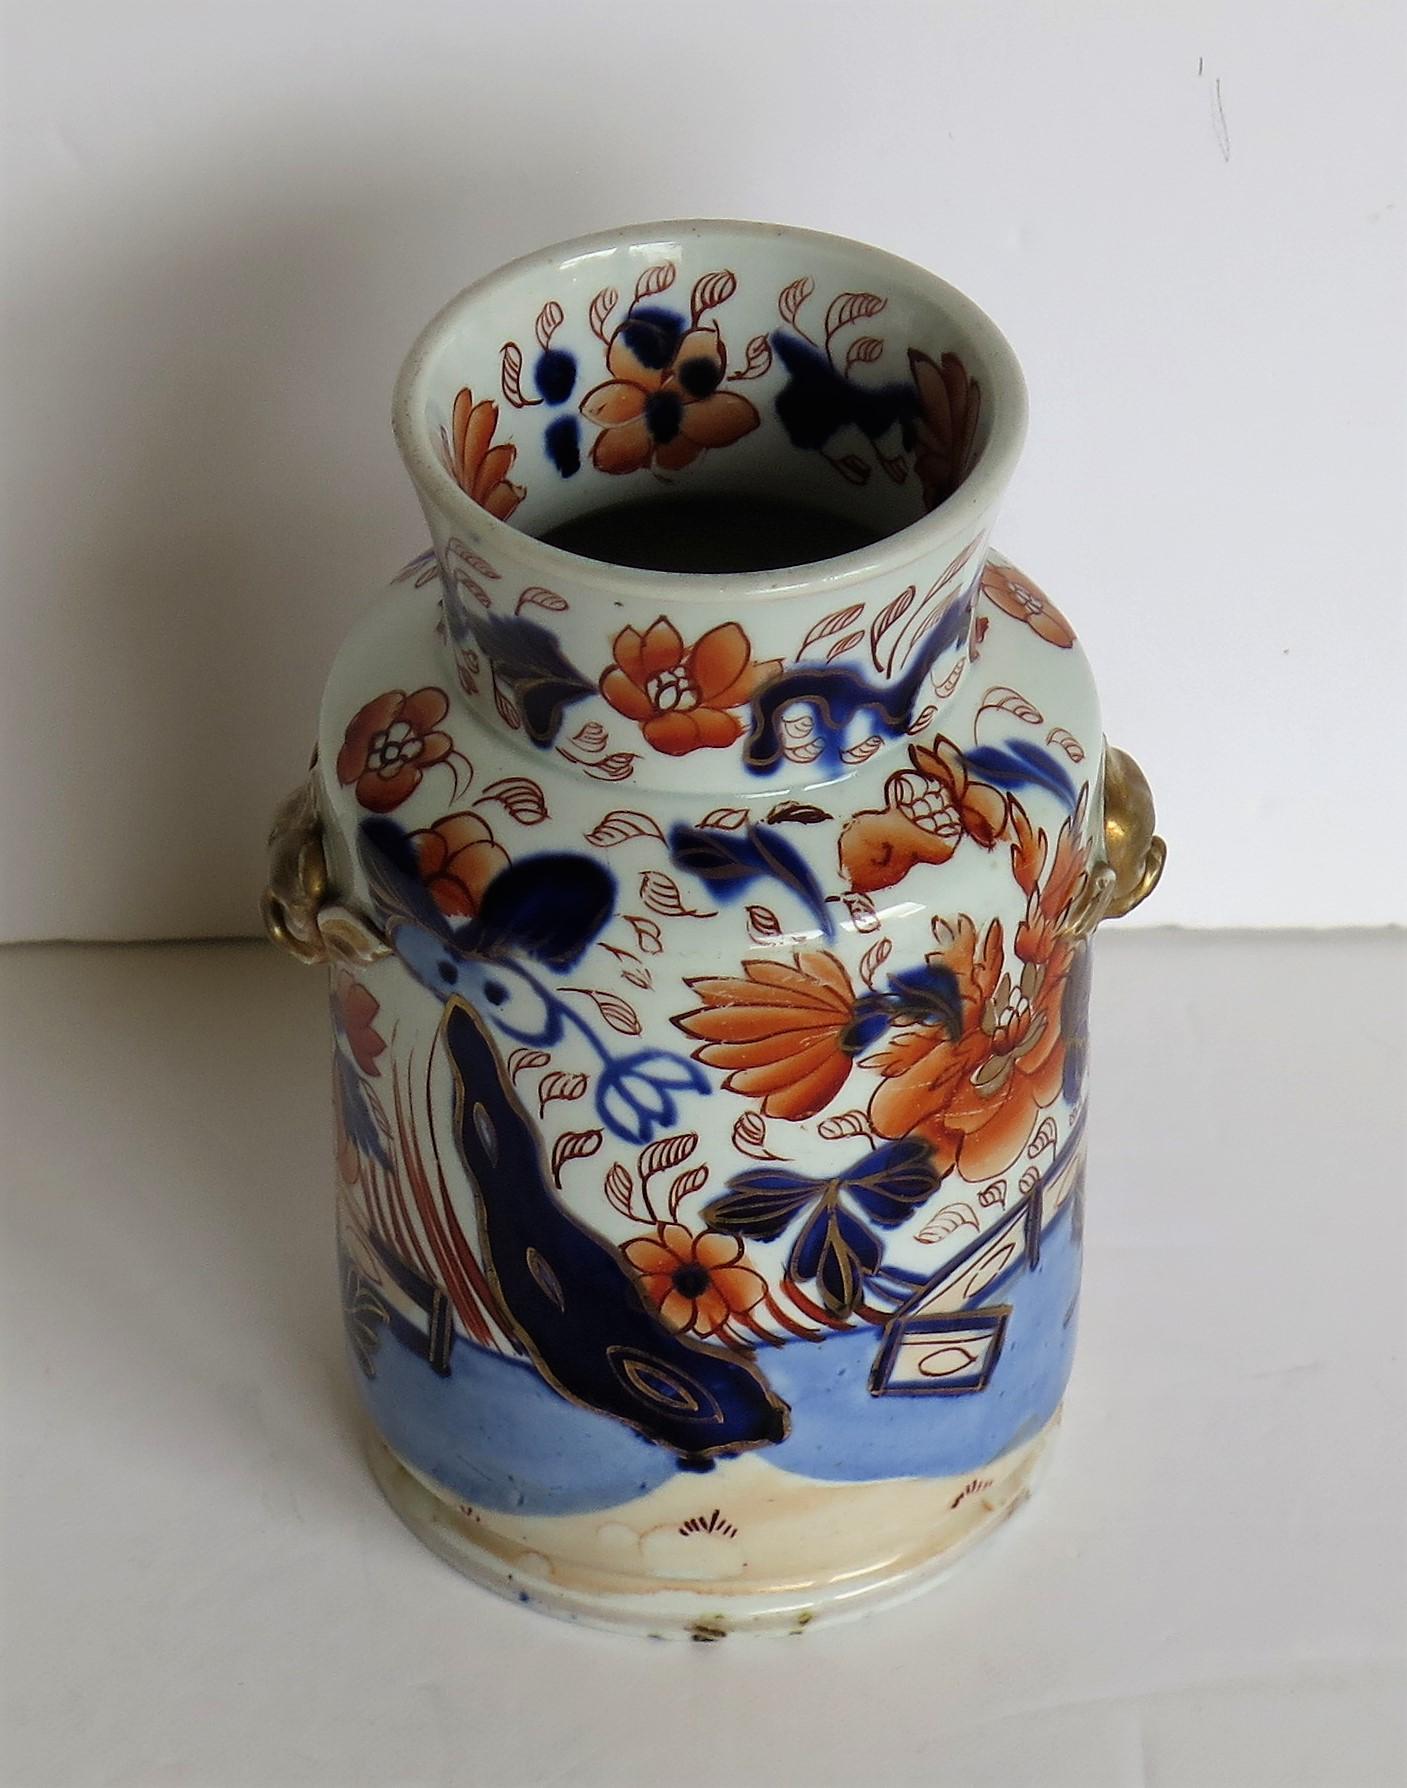 This is a rare ironstone vase or jar made by Mason's, Lane Delph, Staffordshire Potteries, England in its earliest period of Ironstone production, circa 1813-1815.

The vase is well potted, having a cylindrical body with a smaller diameter high